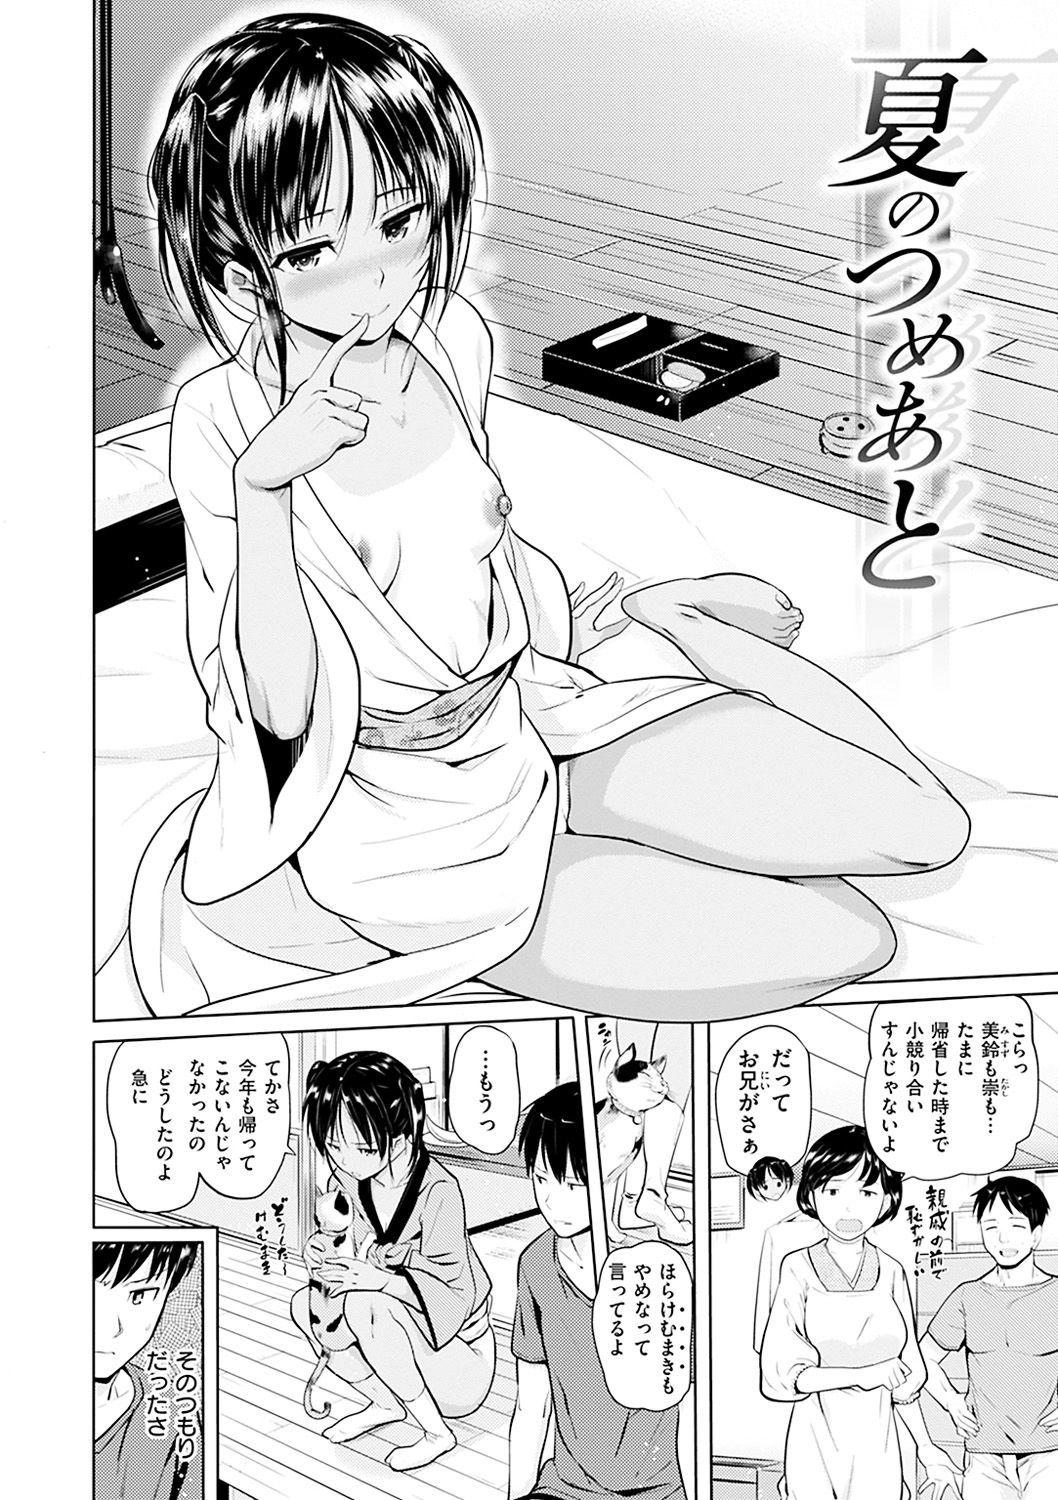 [Knuckle Curve] Onii-chan Kanshasai - Sexgiving Day [Digital] 141